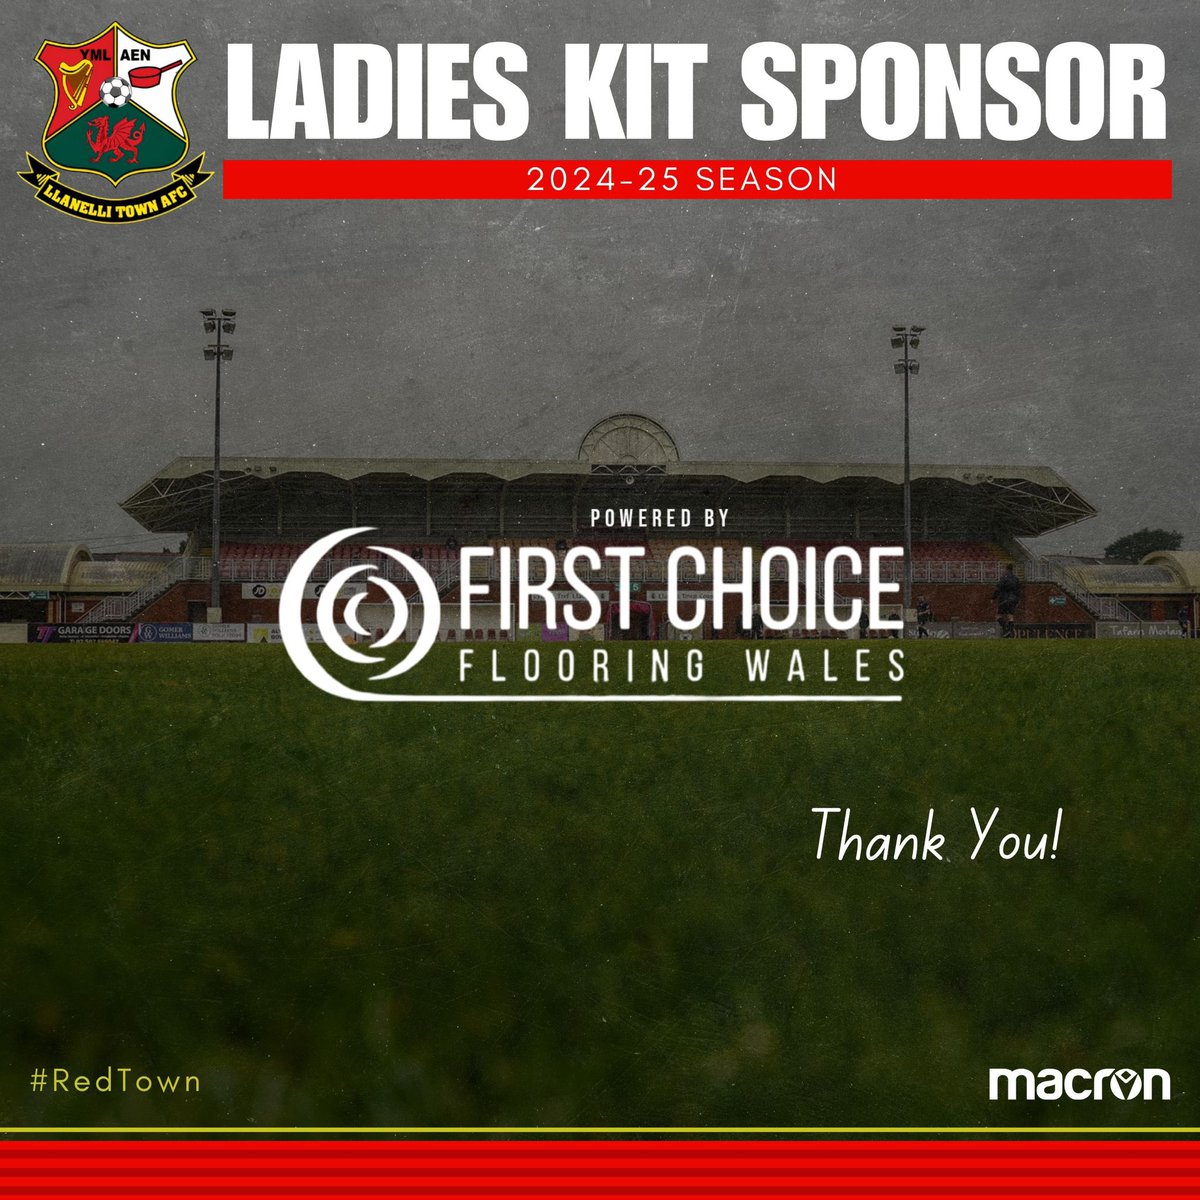 We would like to give a massive thank you to Jason Davies at First Choice Flooring Wales for sponsoring our ladies team, taking the front of the jersey spot again this season. This will be the 4th season that Jason has sponsored the club! 1/3 👇